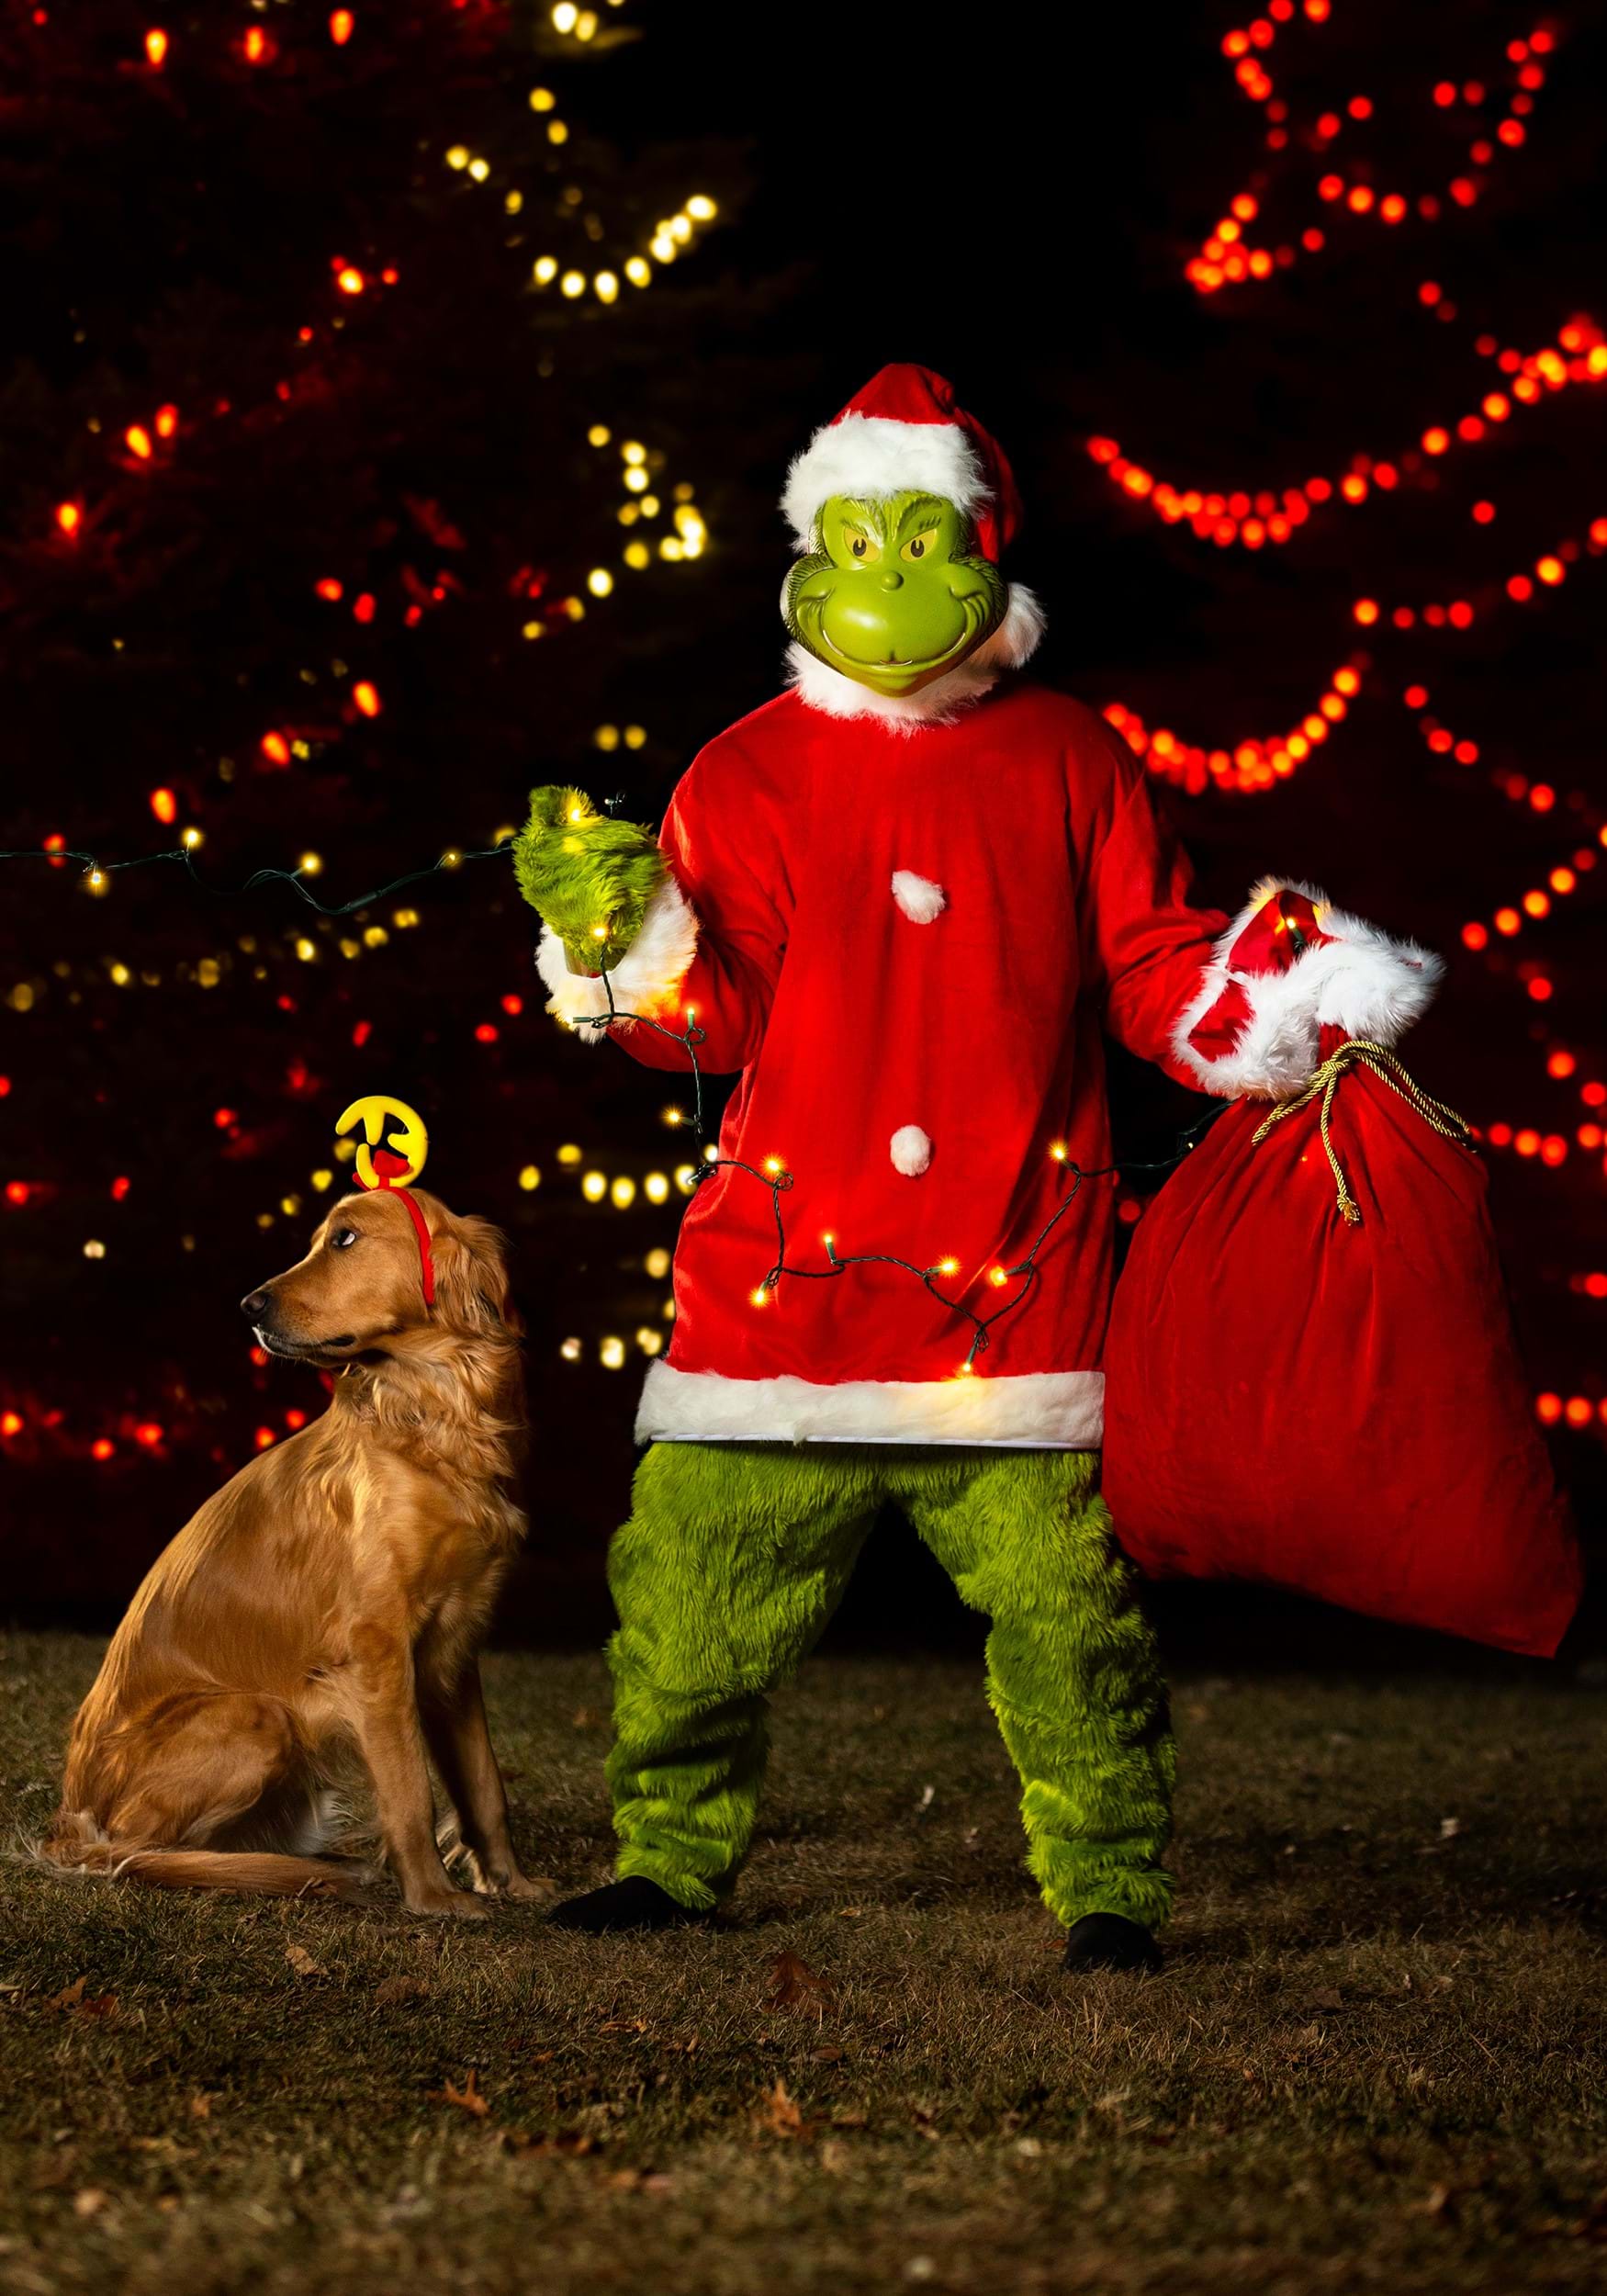 https://images.halloweencostumes.com/products/50214/2-1-231546/the-grinch-santa-deluxe-jumpsuit-with-mask-alt-1.jpg